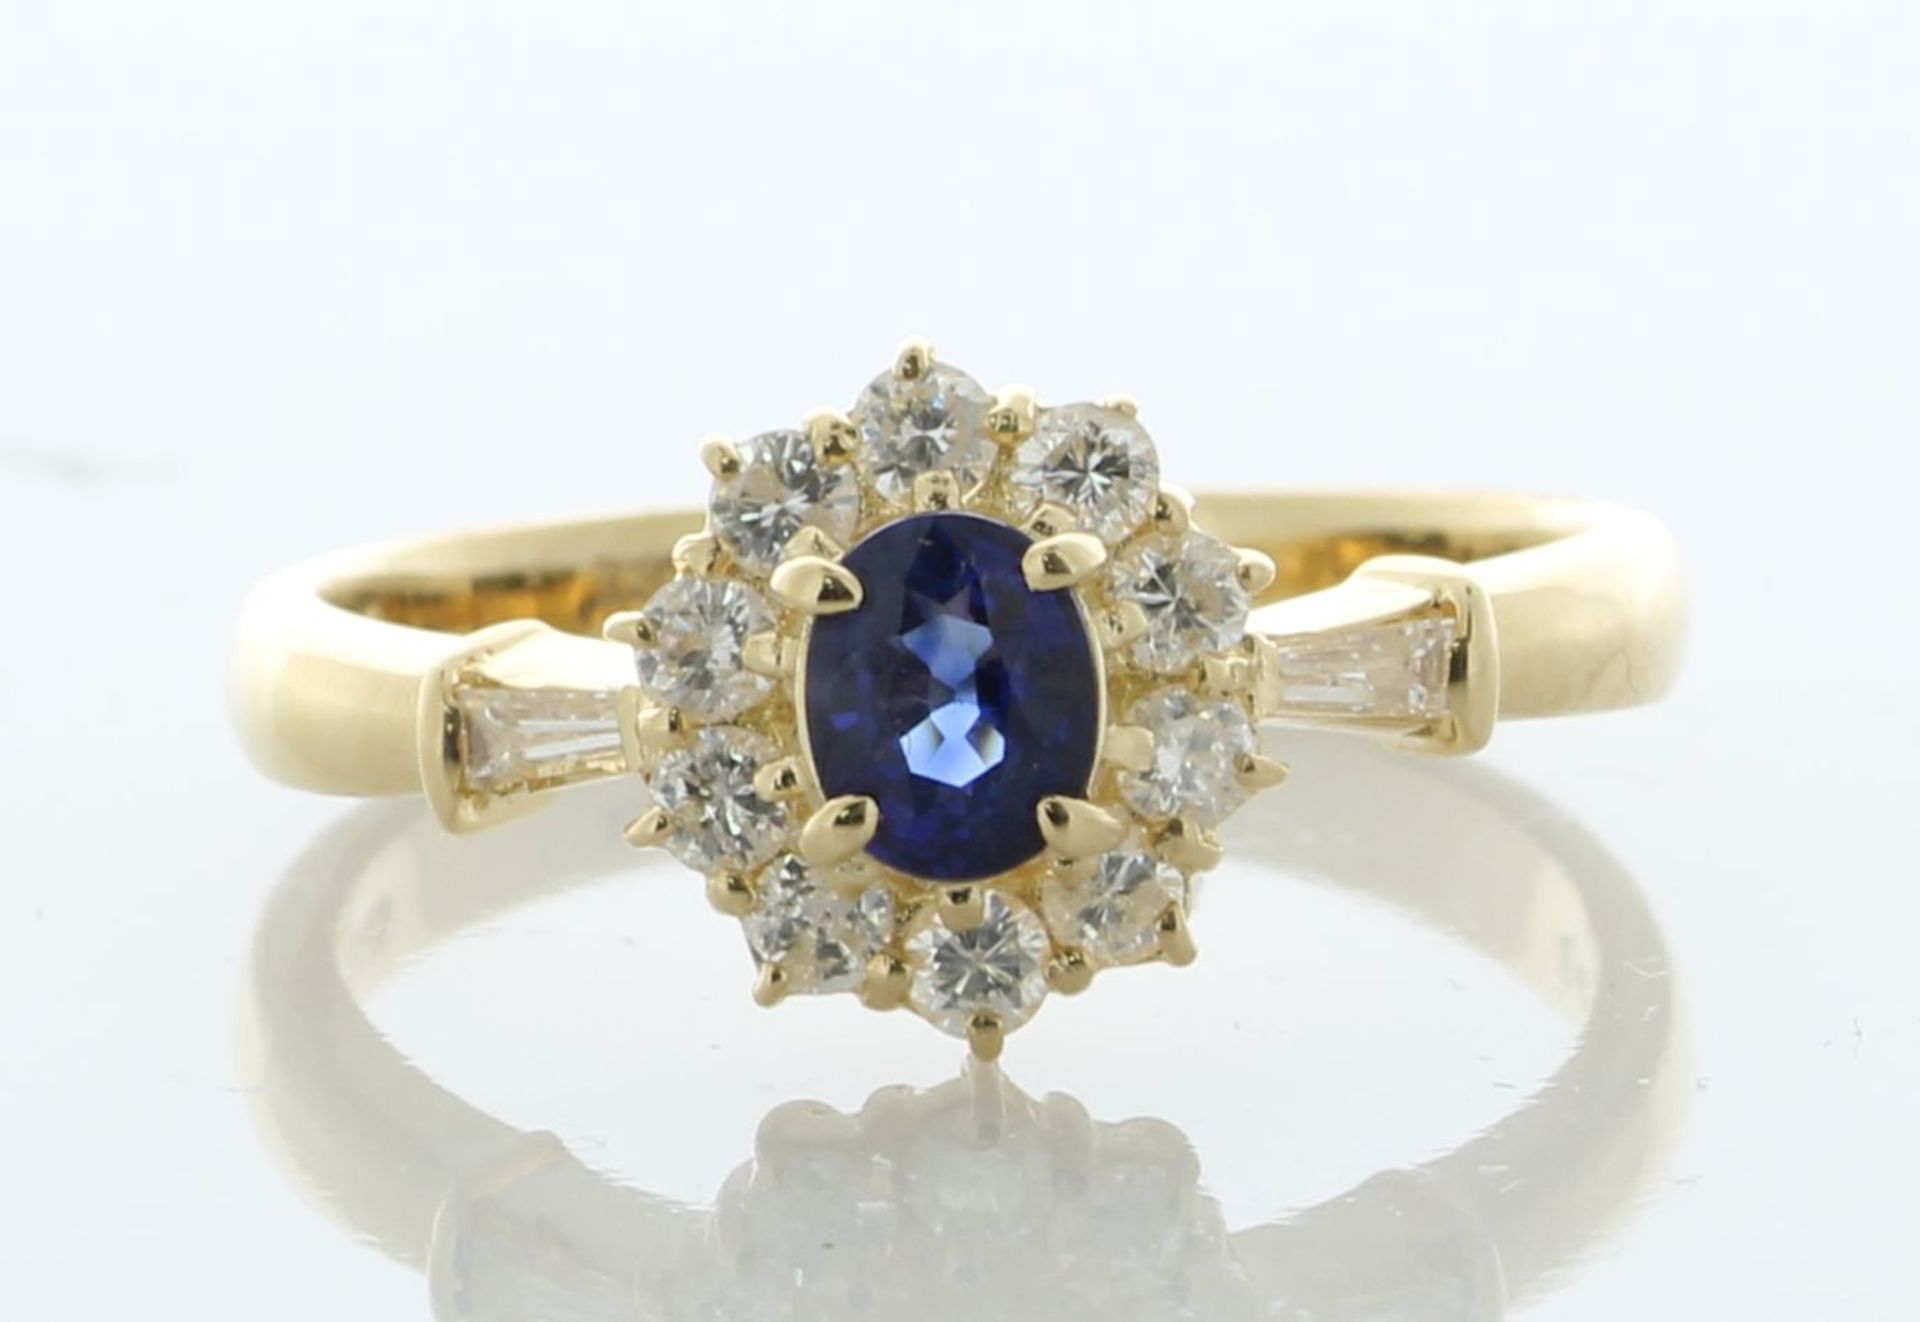 18ct Yellow Gold Oval Cut Sapphire And Diamond Ring (S0.44) 0.40 Carats - Valued By IDI £7,450. - Image 3 of 5